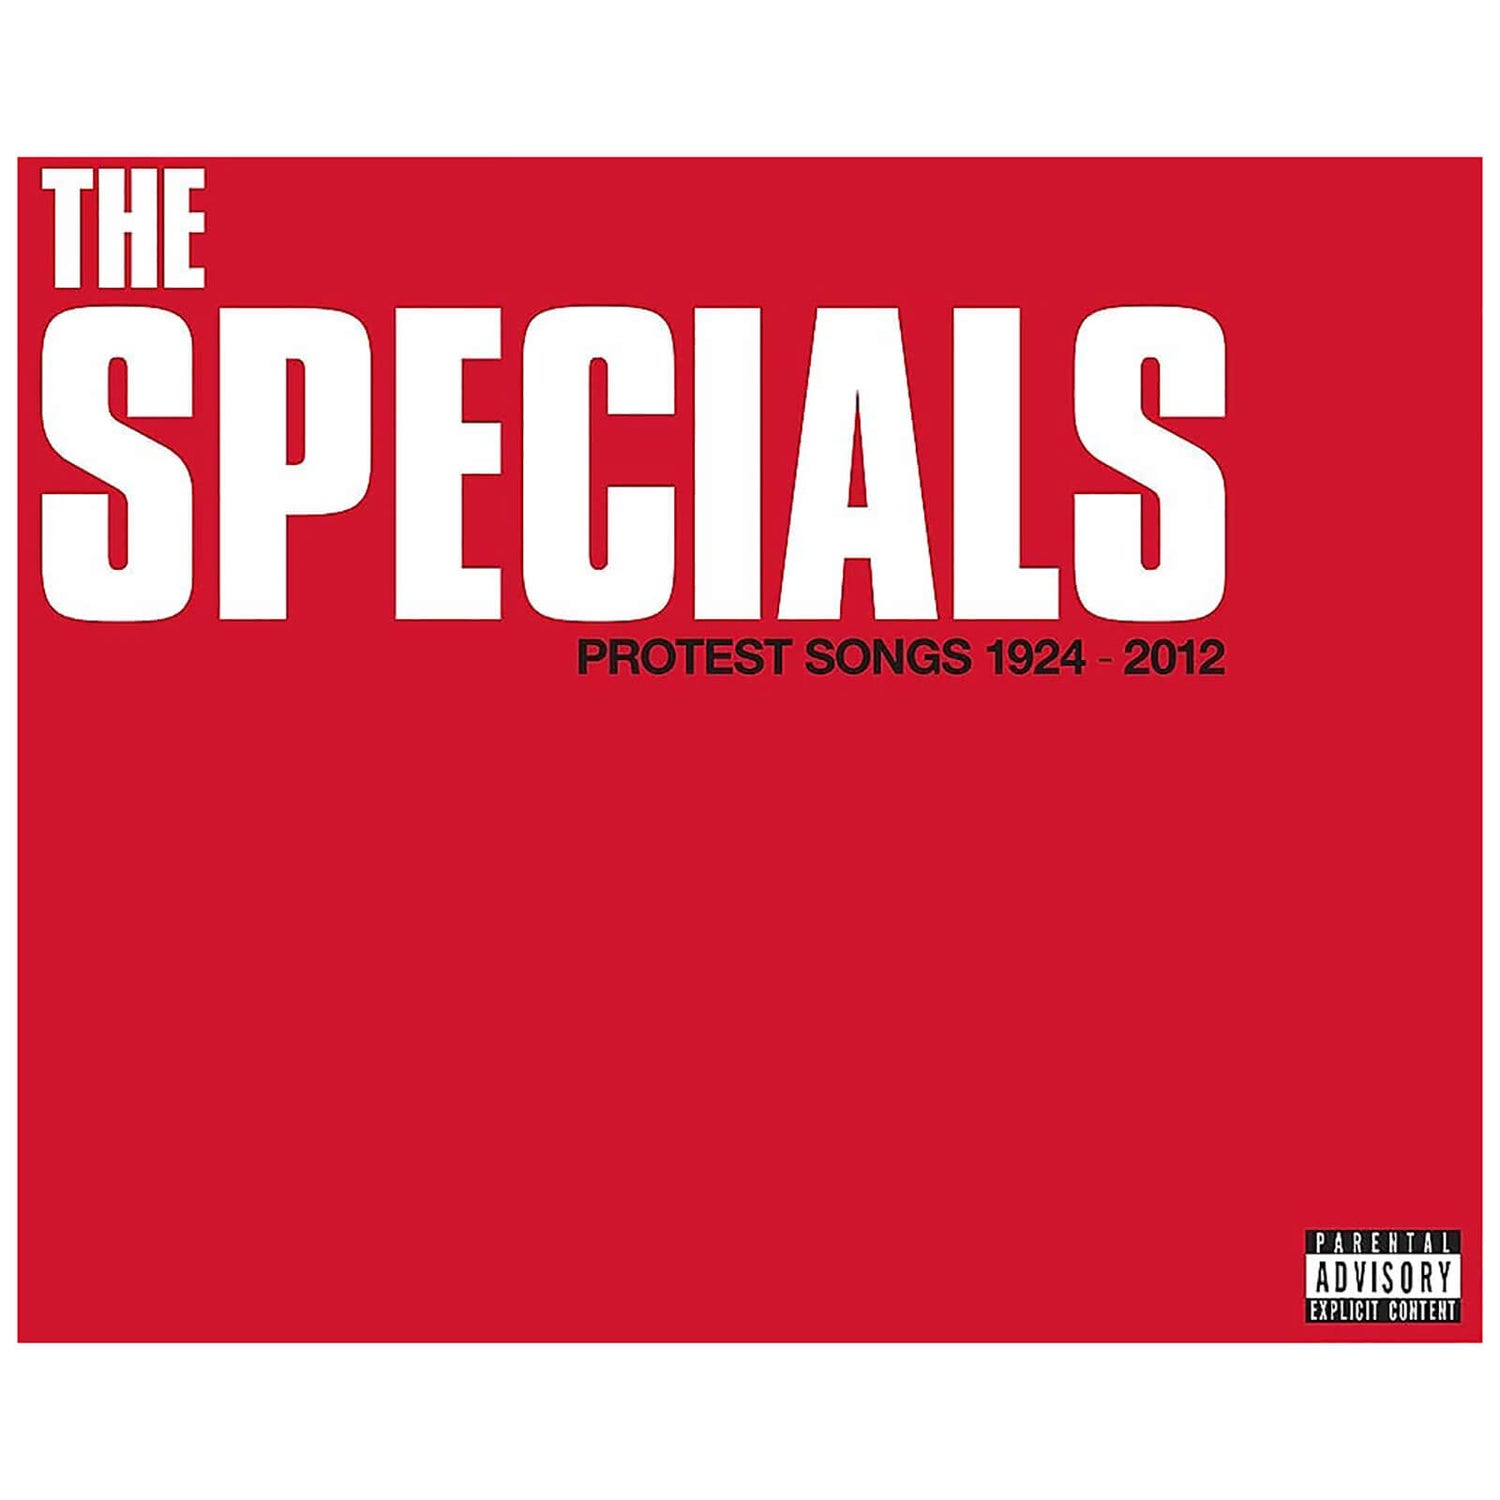 The Specials - Protest Songs 1924-2012 Vinyl